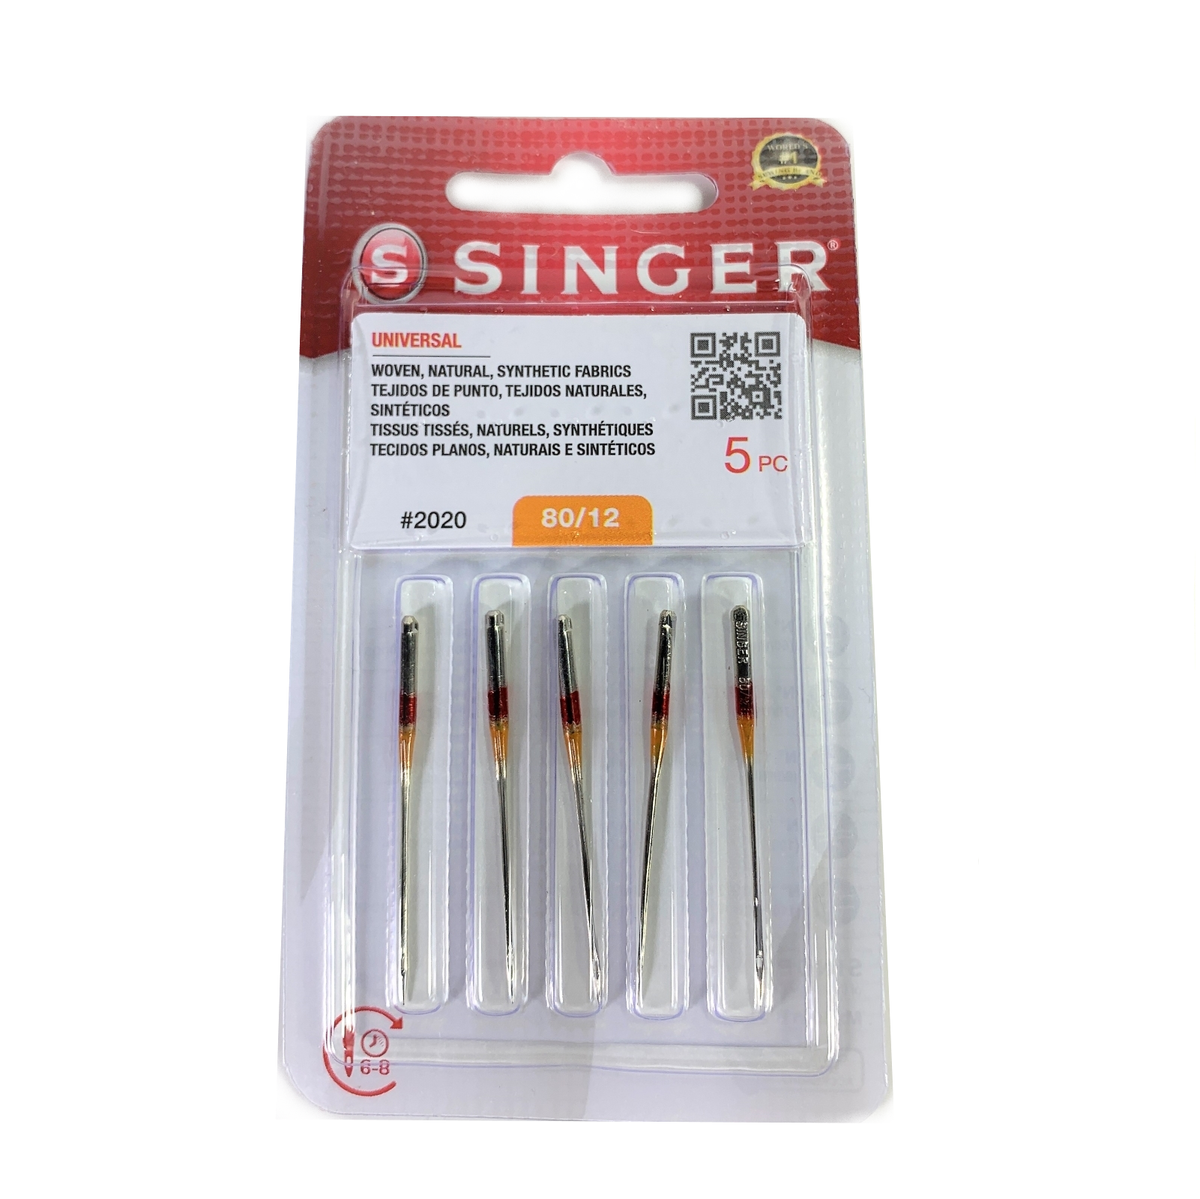 Singer Sewing Machine Needles 15x1 Universal 2020 5 Pack - Choice of Size